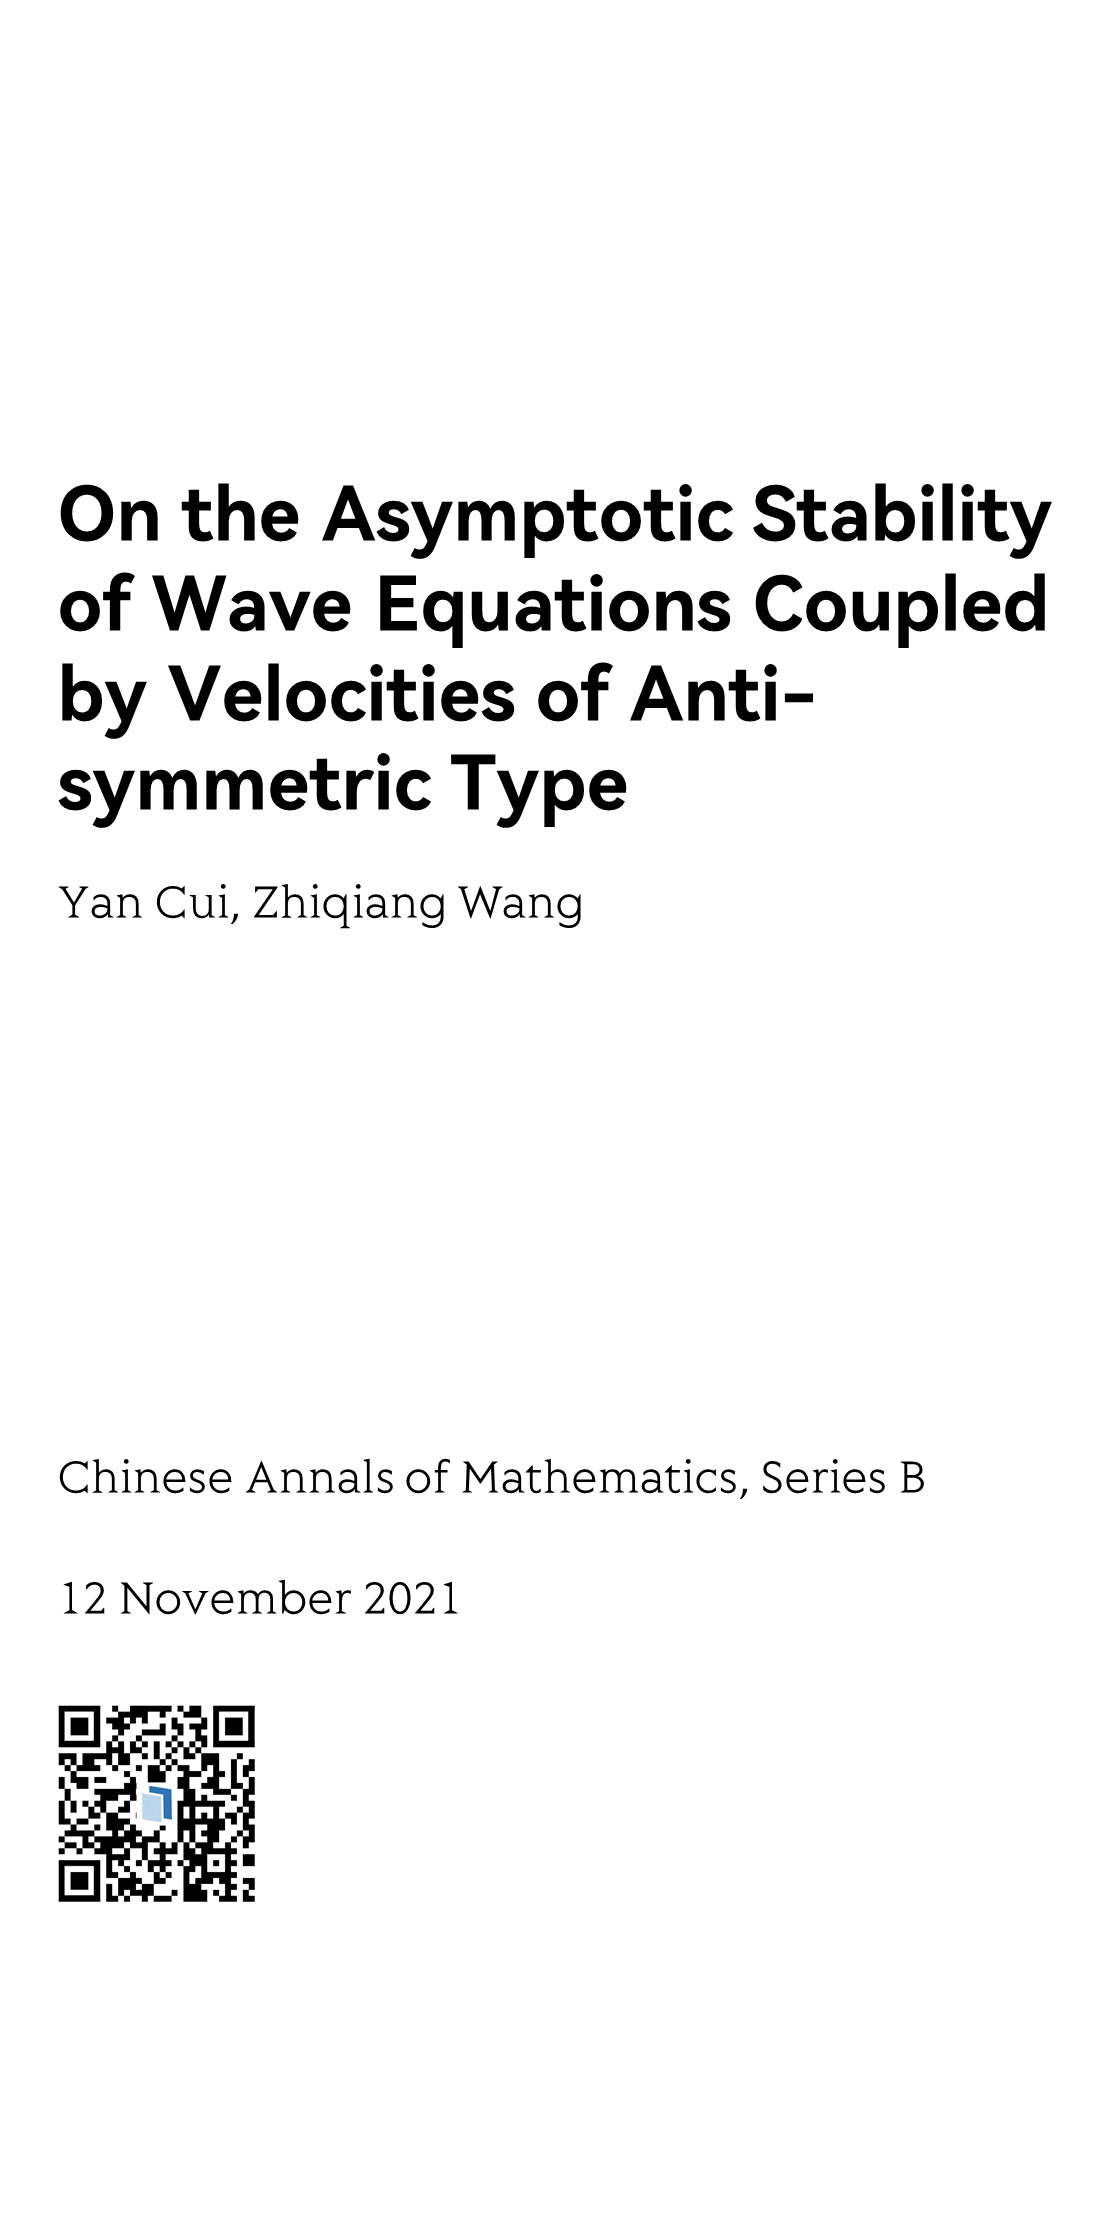 On the Asymptotic Stability of Wave Equations Coupled by Velocities of Anti-symmetric Type_1